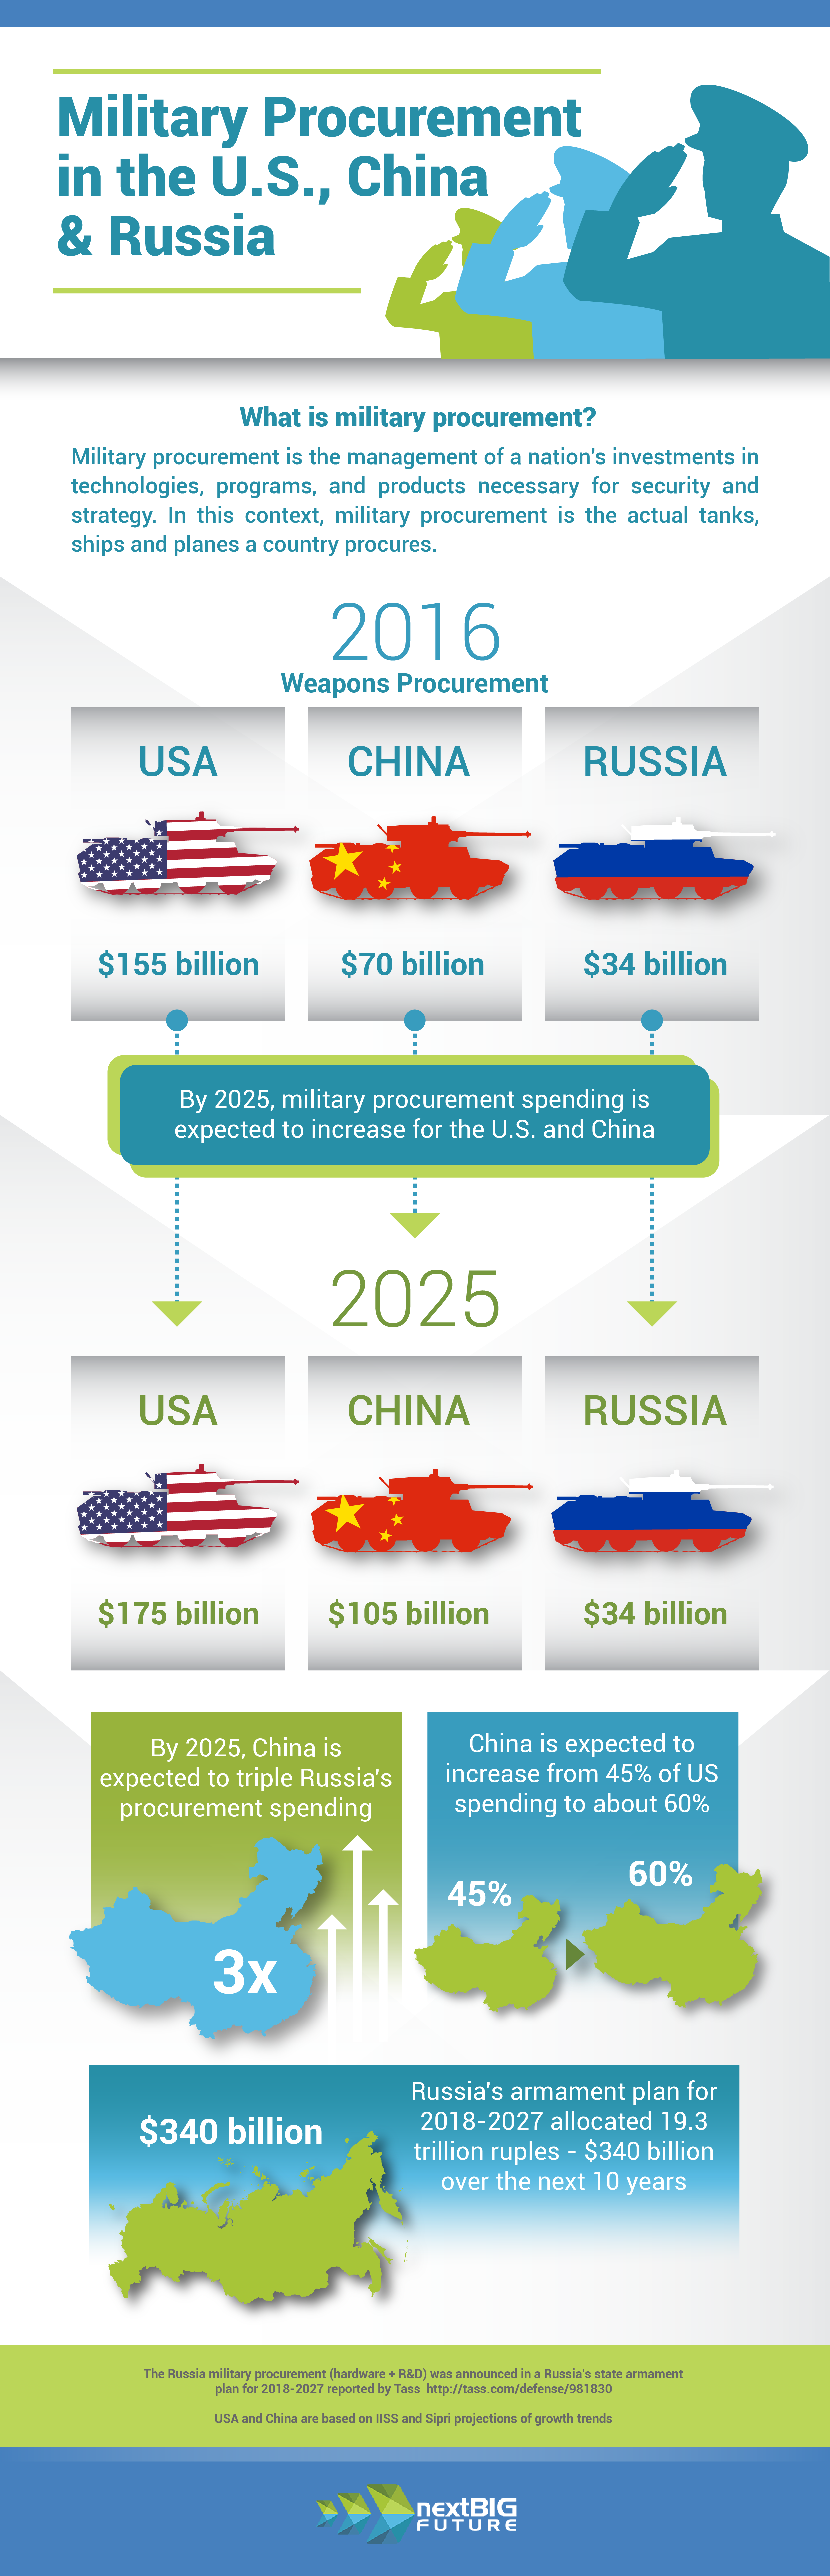 US vs China vs Russia: Who’s Winning the Military Procurement Race - Infographic